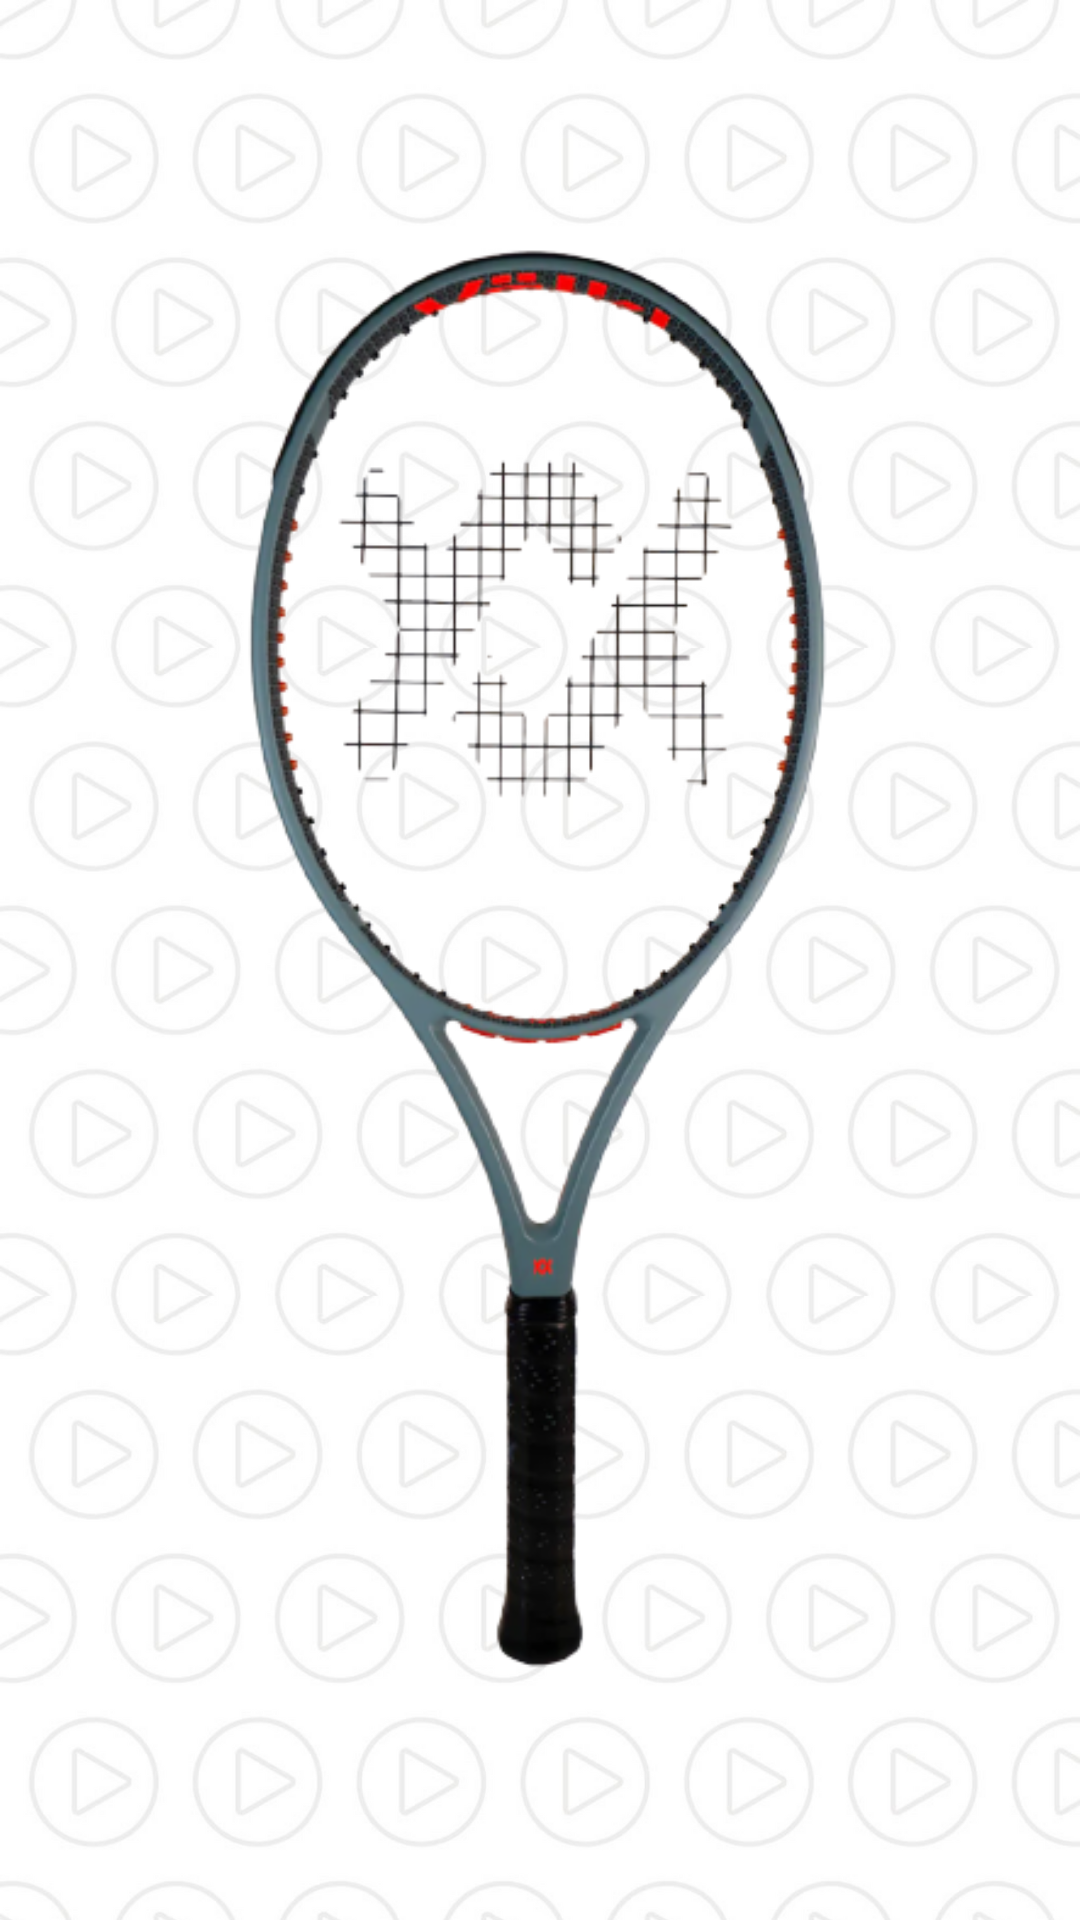 Tennis Racquet for Beginner and Intermedia players Volkl model VCELL V1 MP